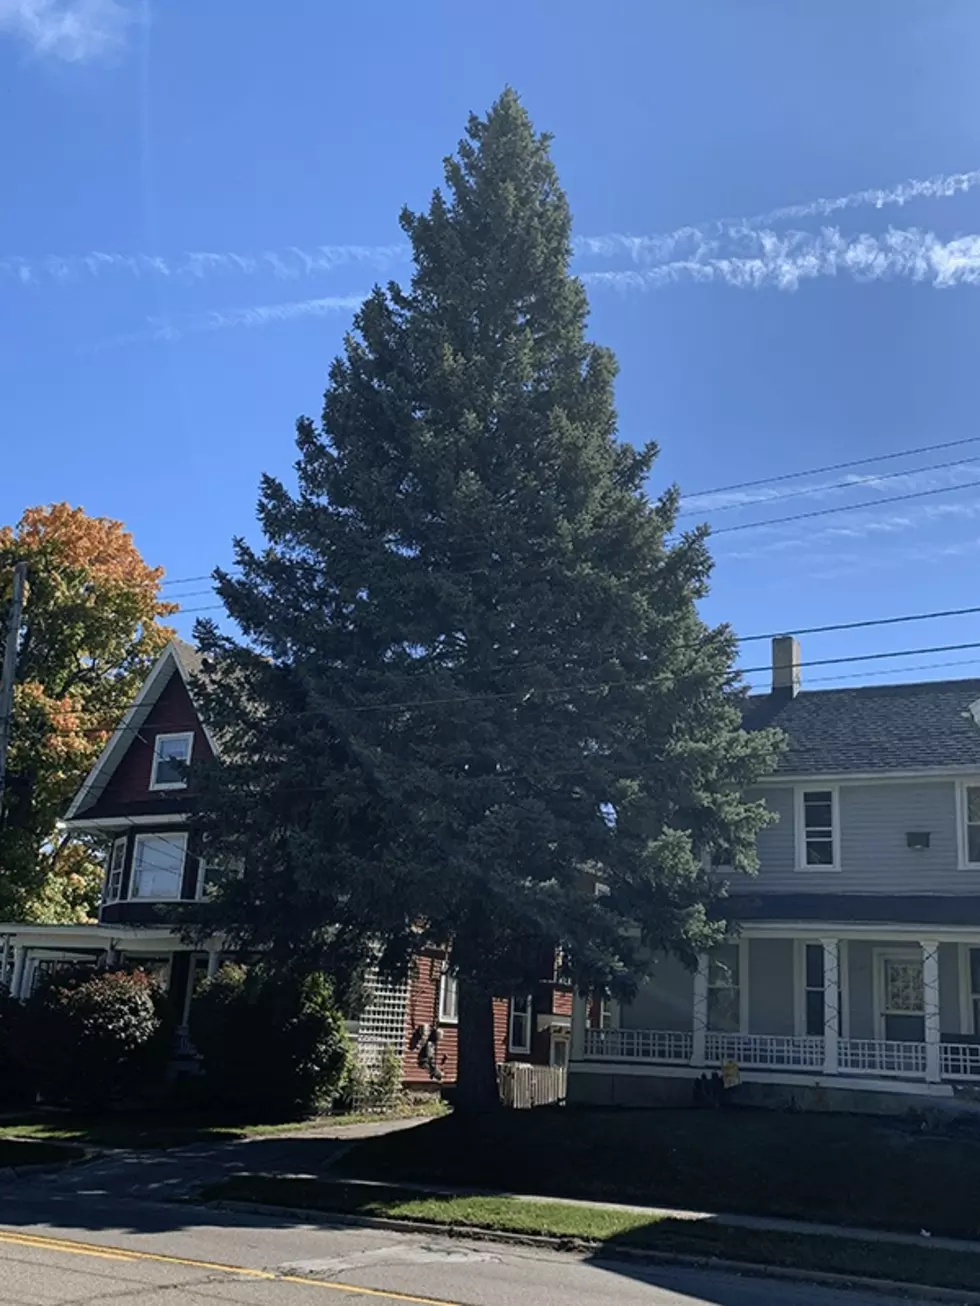 Meet the Official Michigan Christmas Tree of 2022!